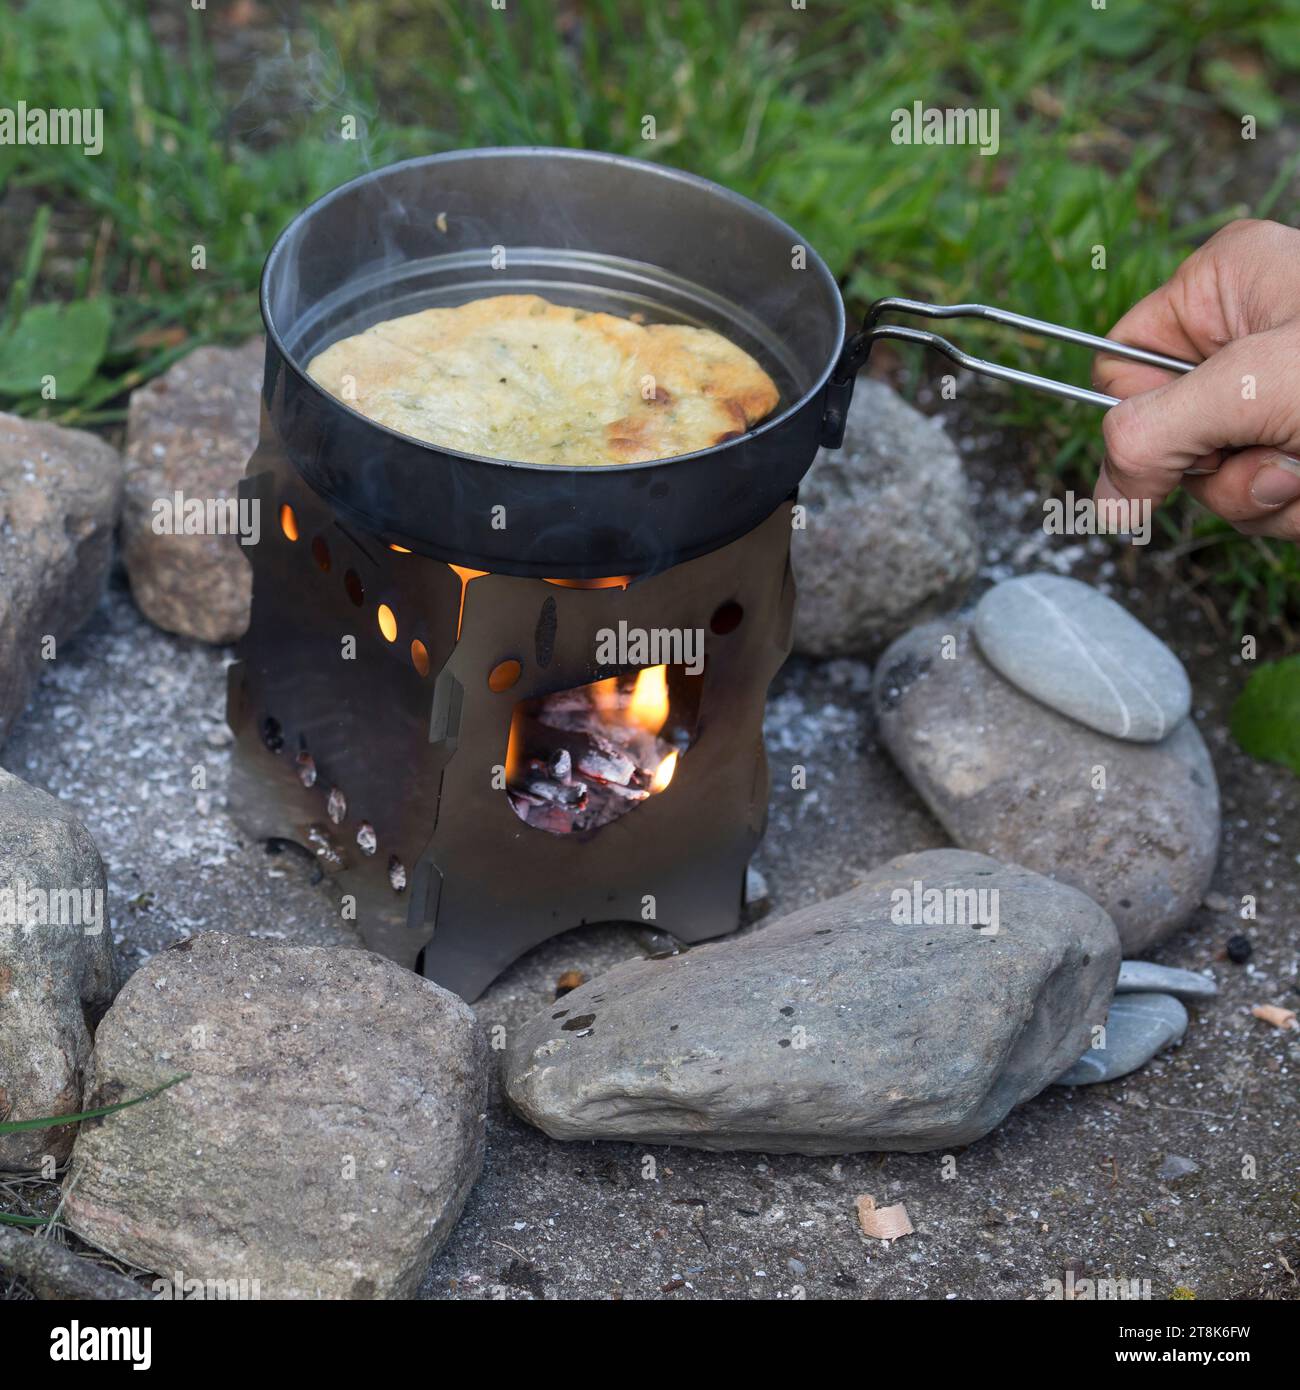 making of bannock, is baked on open fire, bread dough is formed and baken in a pan on a camp cooker, series picture 5/5 Stock Photo